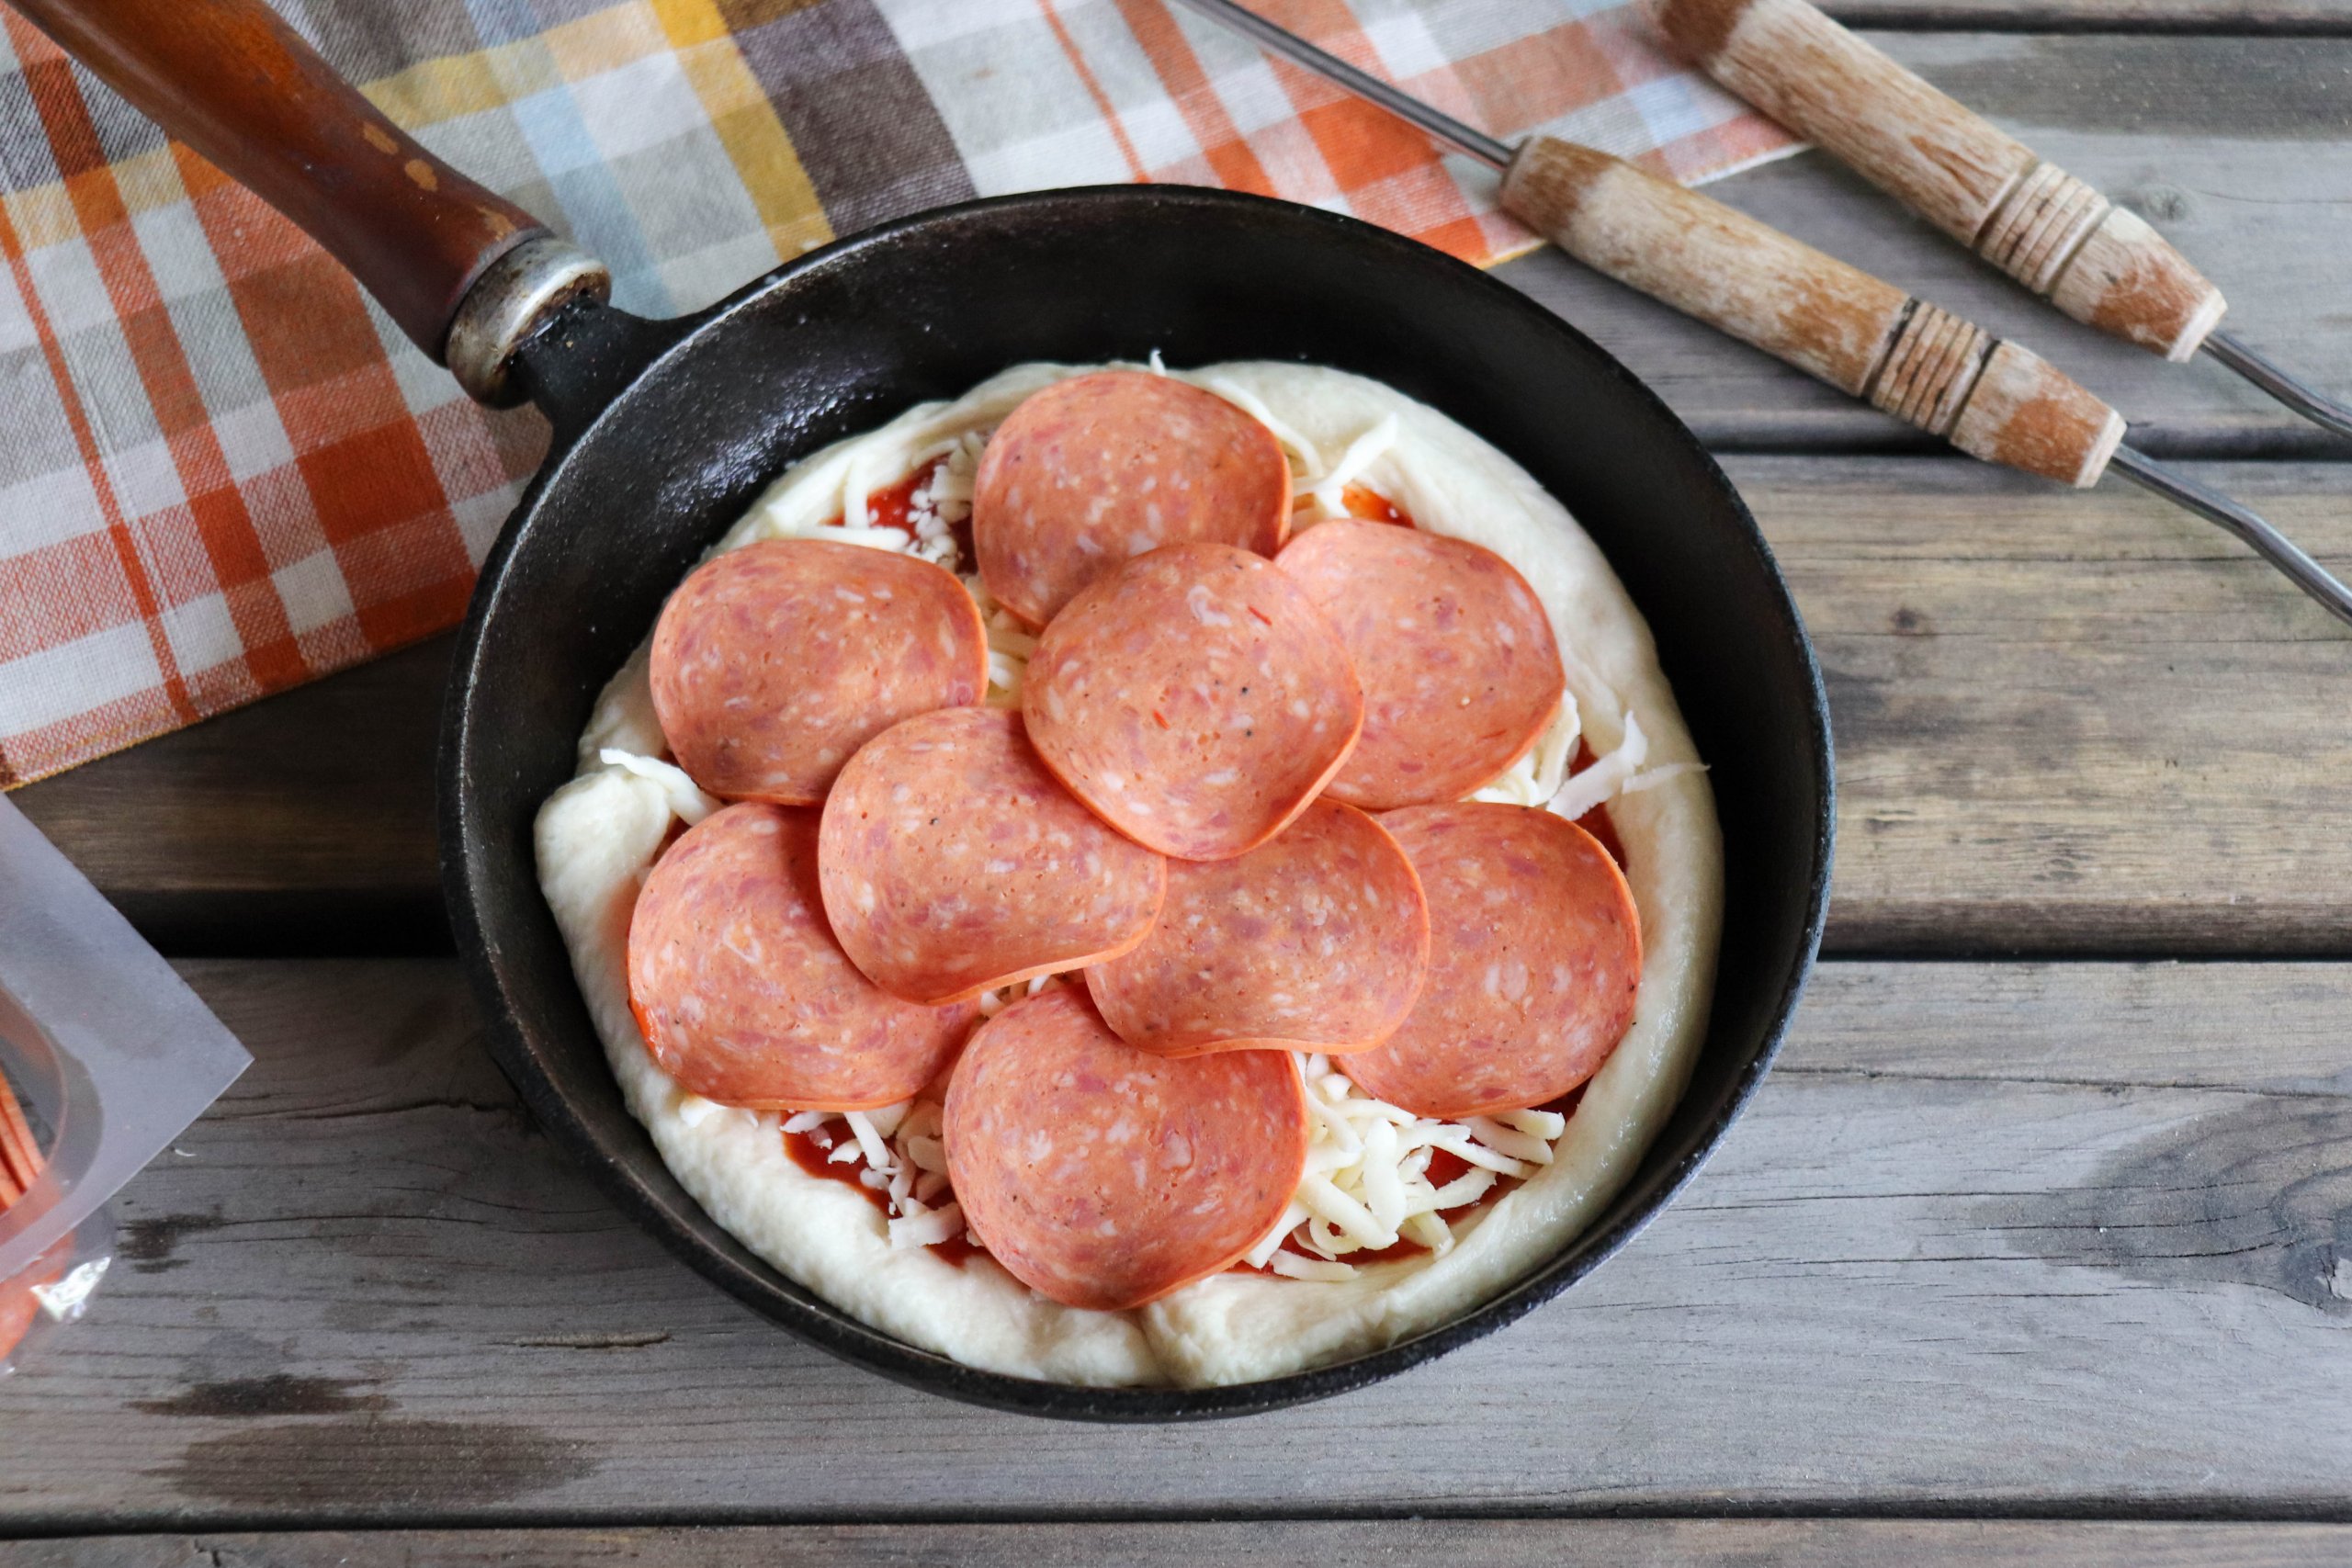 Pizza dough with tomato sauce, shredded mozzarella and pepperoni slices in a cast iron skillet on a wooden picnic table.